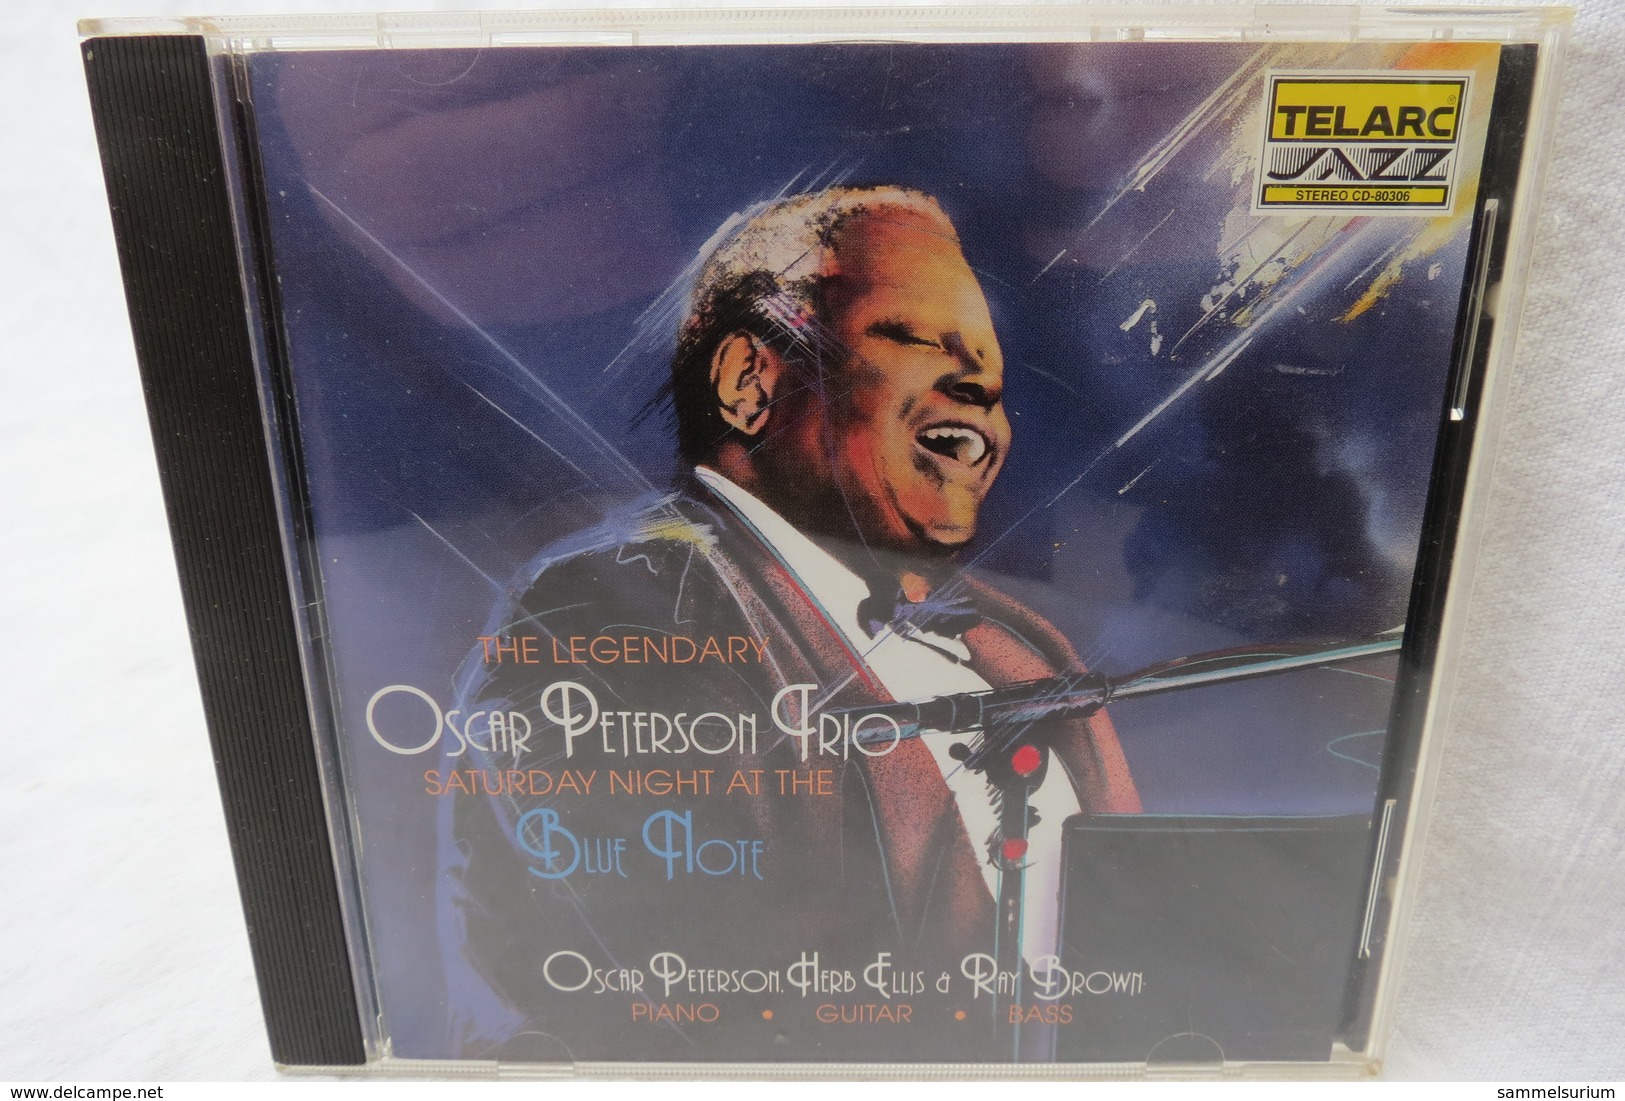 CD "Oscar Peterson Trio" Saturday Night At The Blue Note - Blues